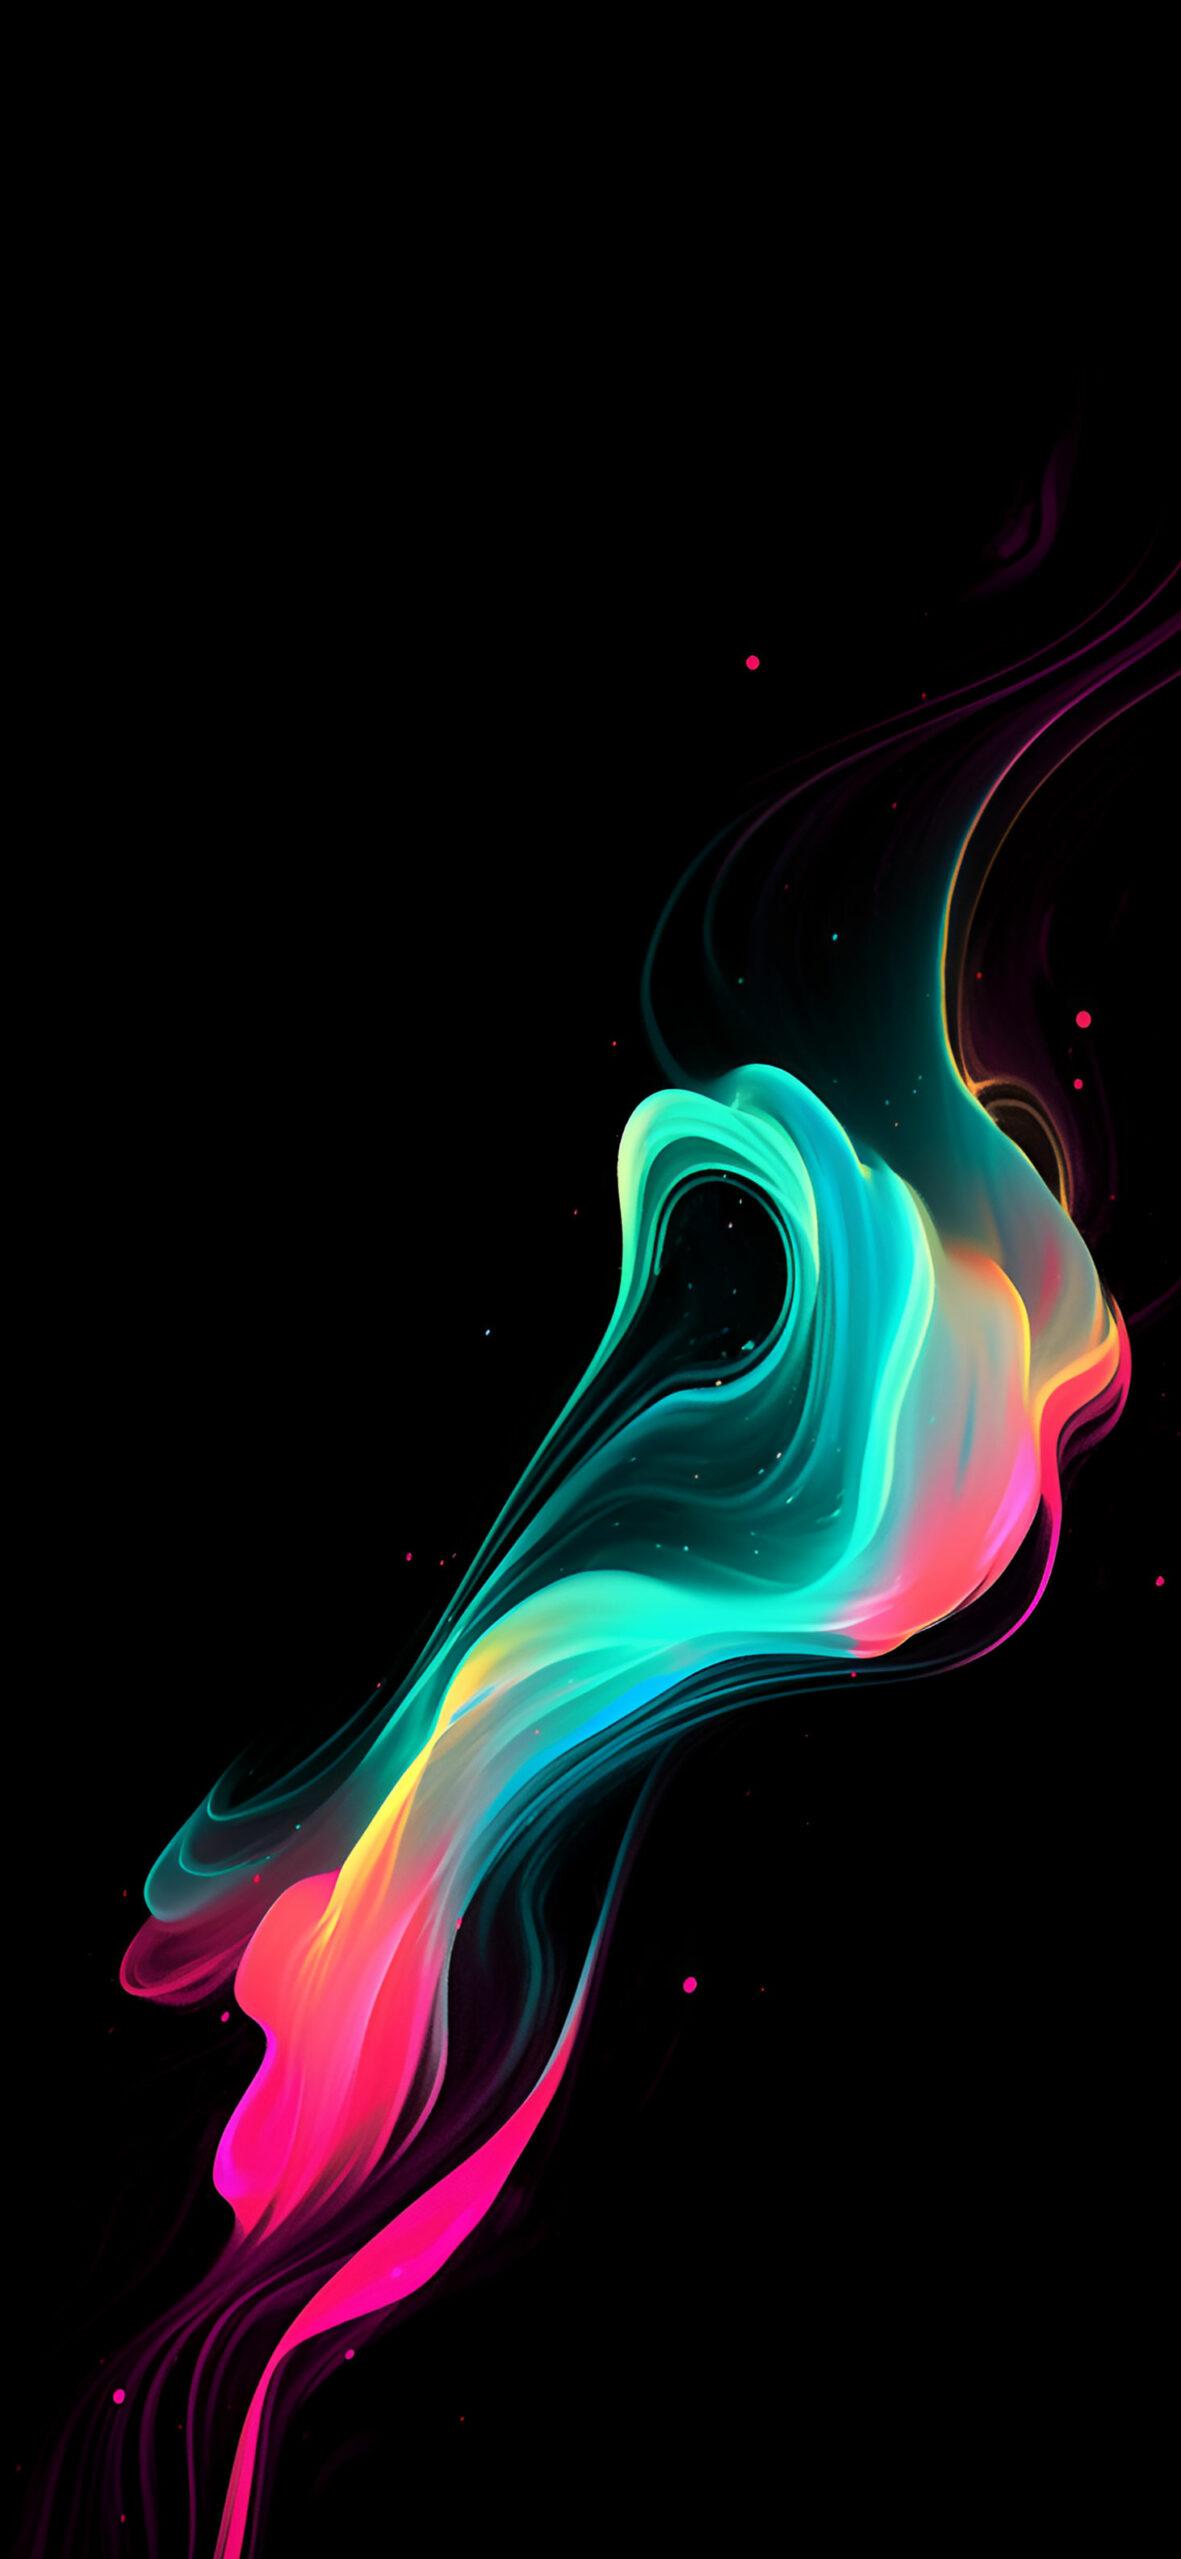 Black Amoled 4K Wallpapers Black Abstract Wallpapers for iPhone